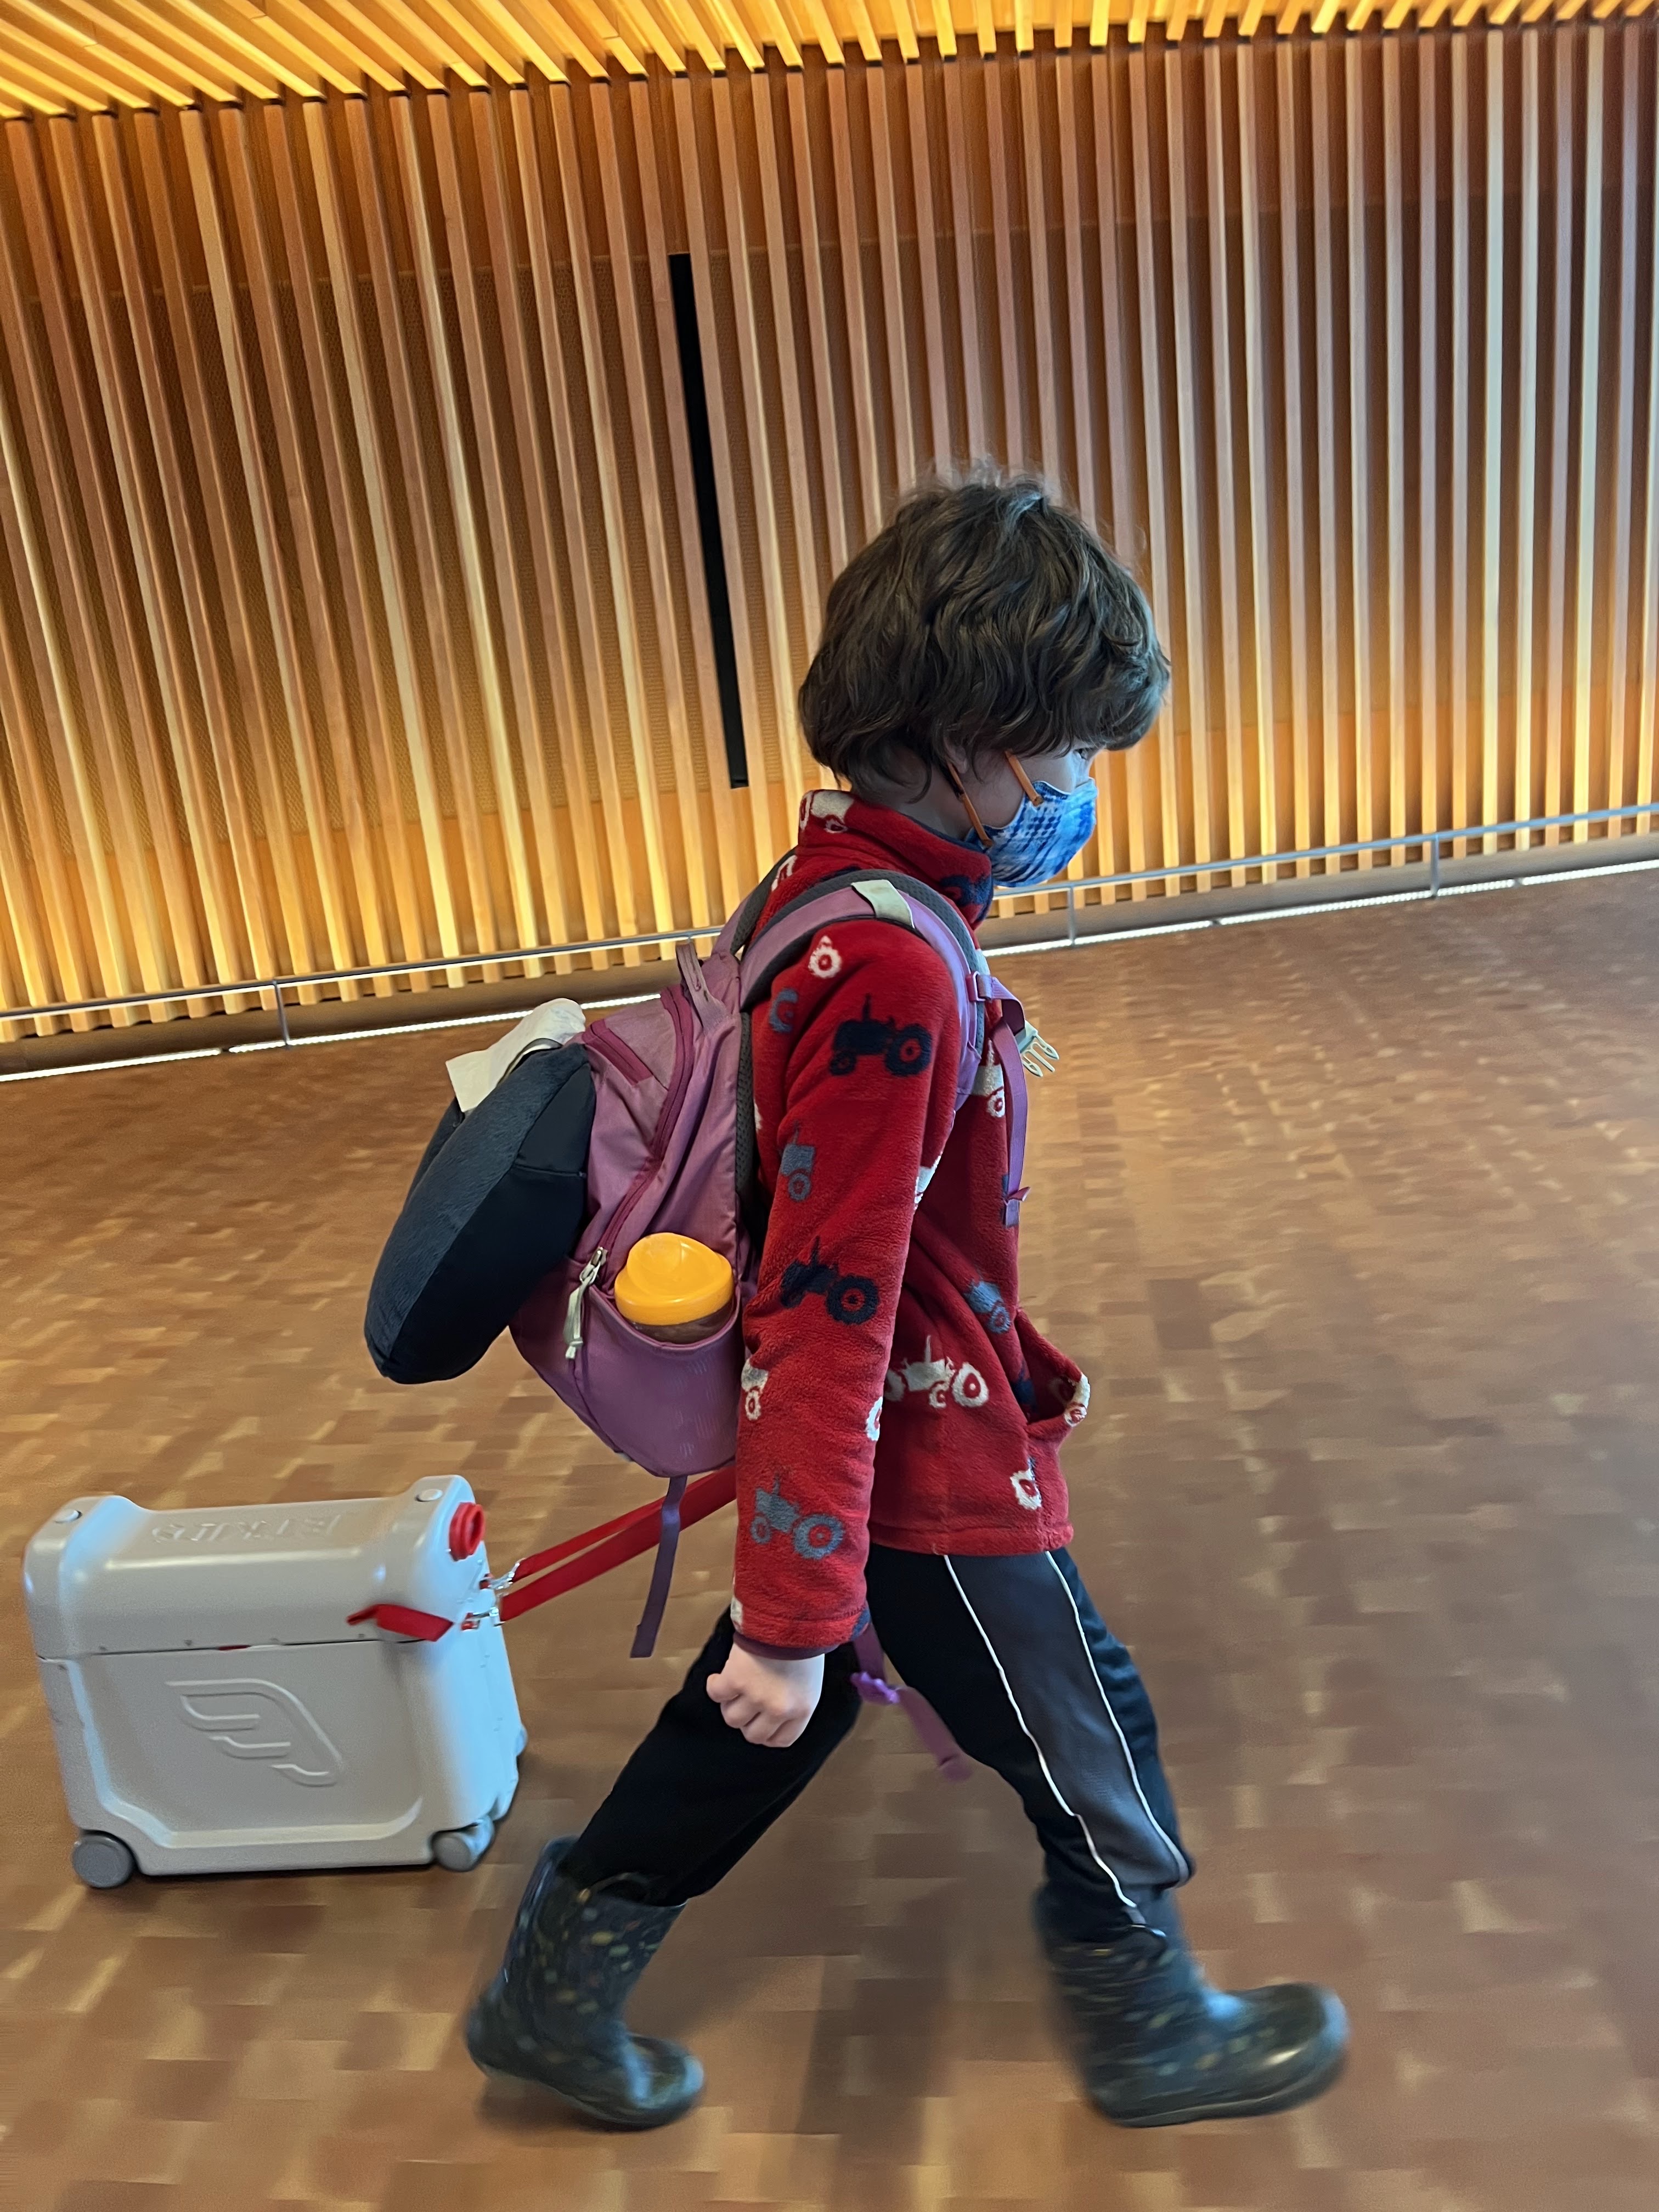 Seven year old boy pulling JetKids BedBox through airport with Nuk hard spout sippy cup in backpack pocket